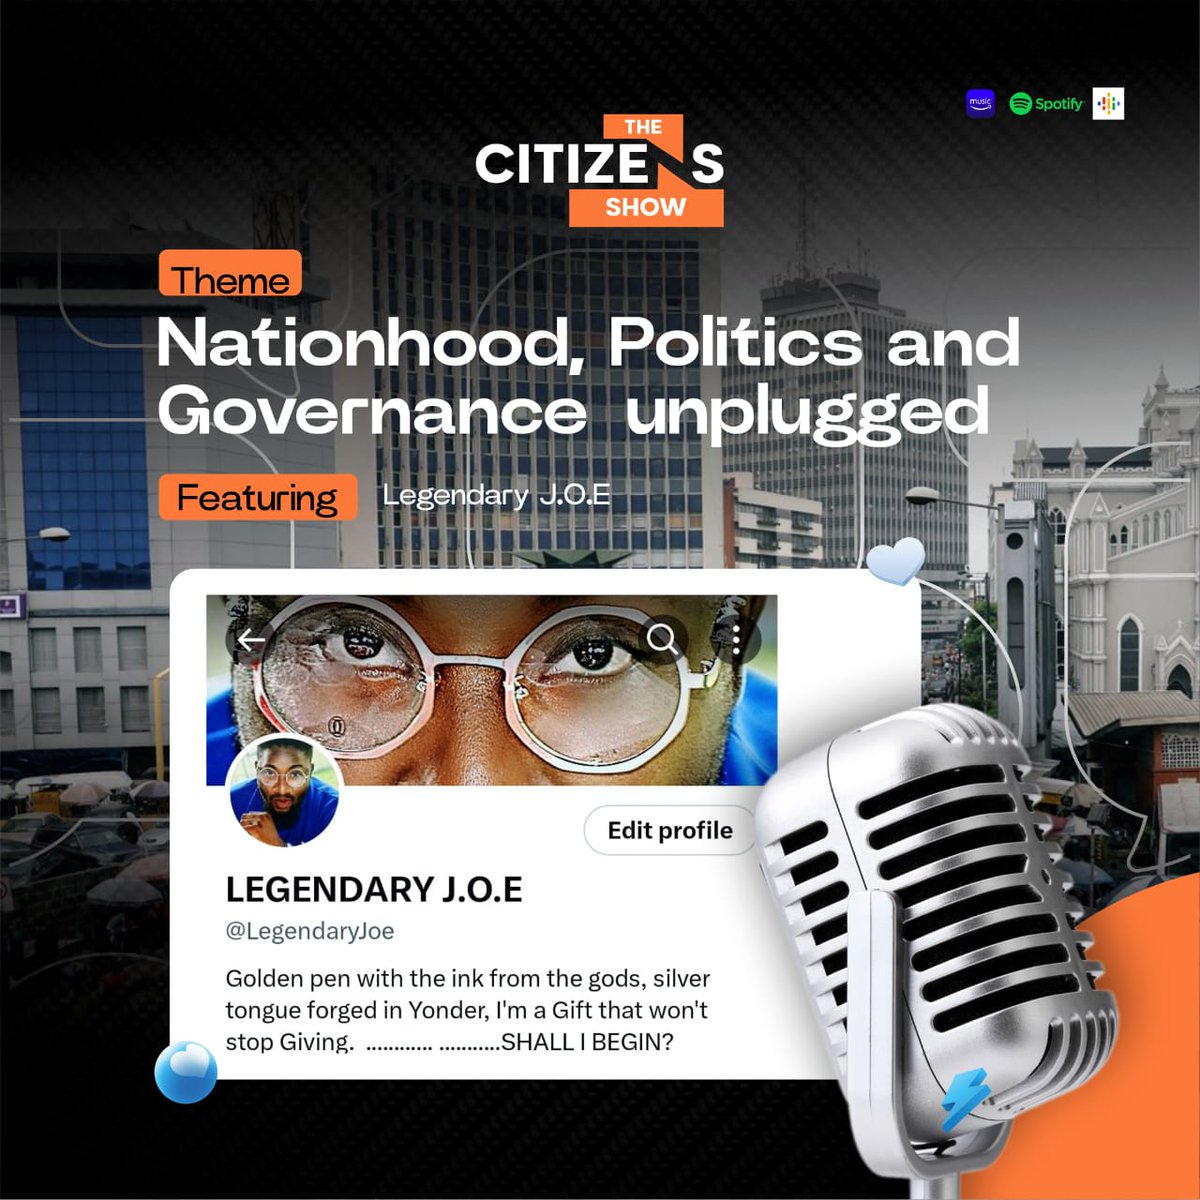 We have an exciting team of speakers lined up. 

Check  them out  👌🏾

@Yemi__Ajayi 
@dollar_por 
@abrahamgreat 
@LegendaryJoe 

Are you excited??? 😊

#podcast #nationhood #politics #Governance #Nigeriadecides #may29 #Obidients #batists #Atikulates